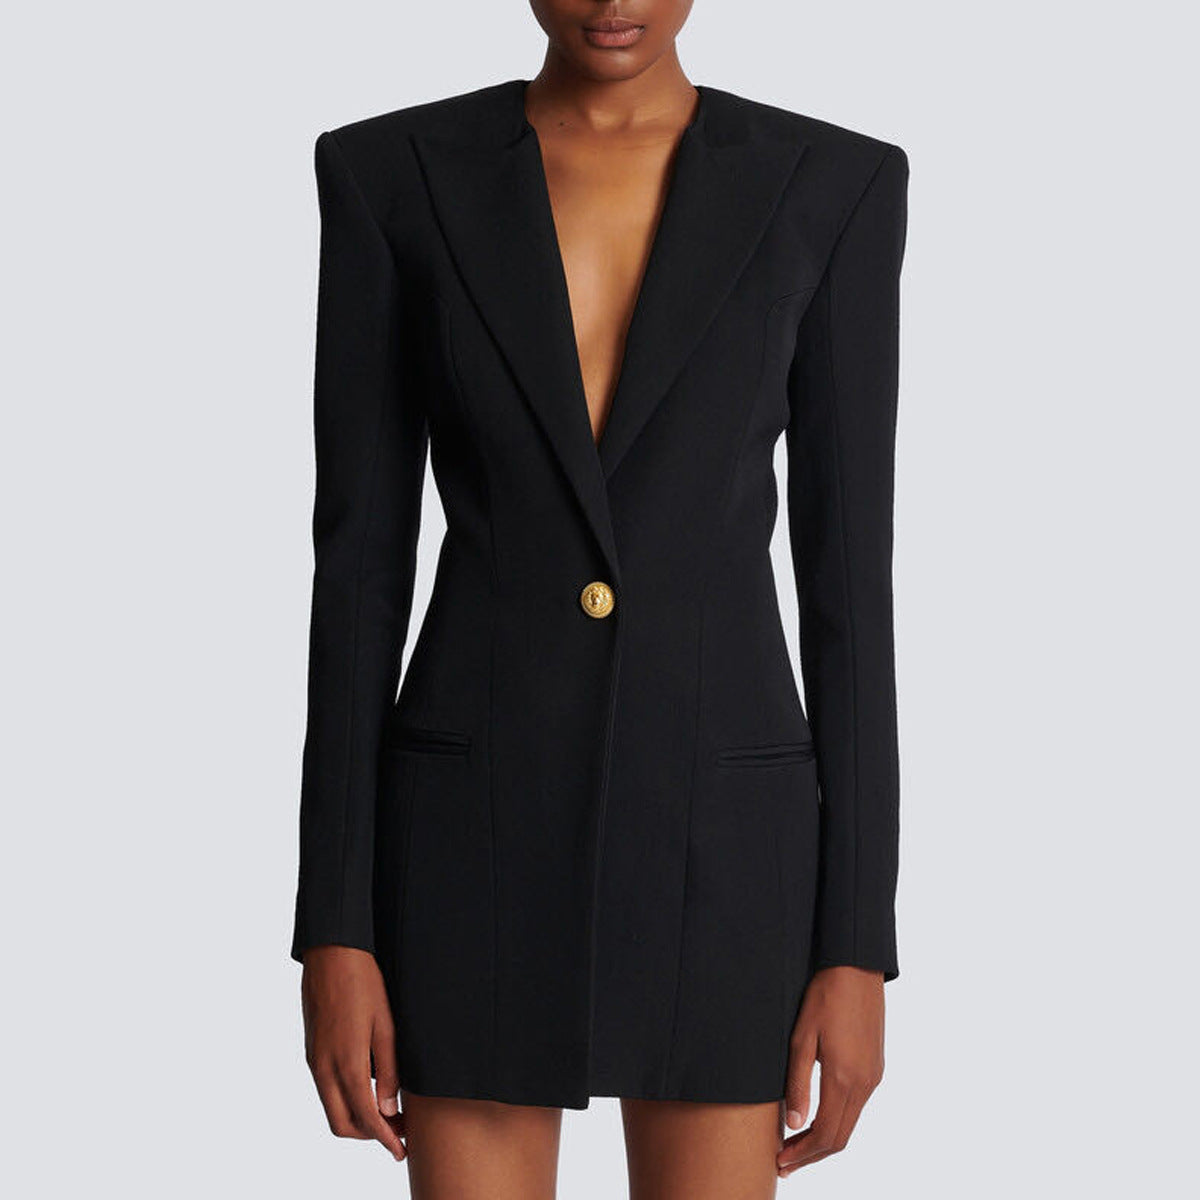 Business Blazer Dress With Ornate Gold Buttons